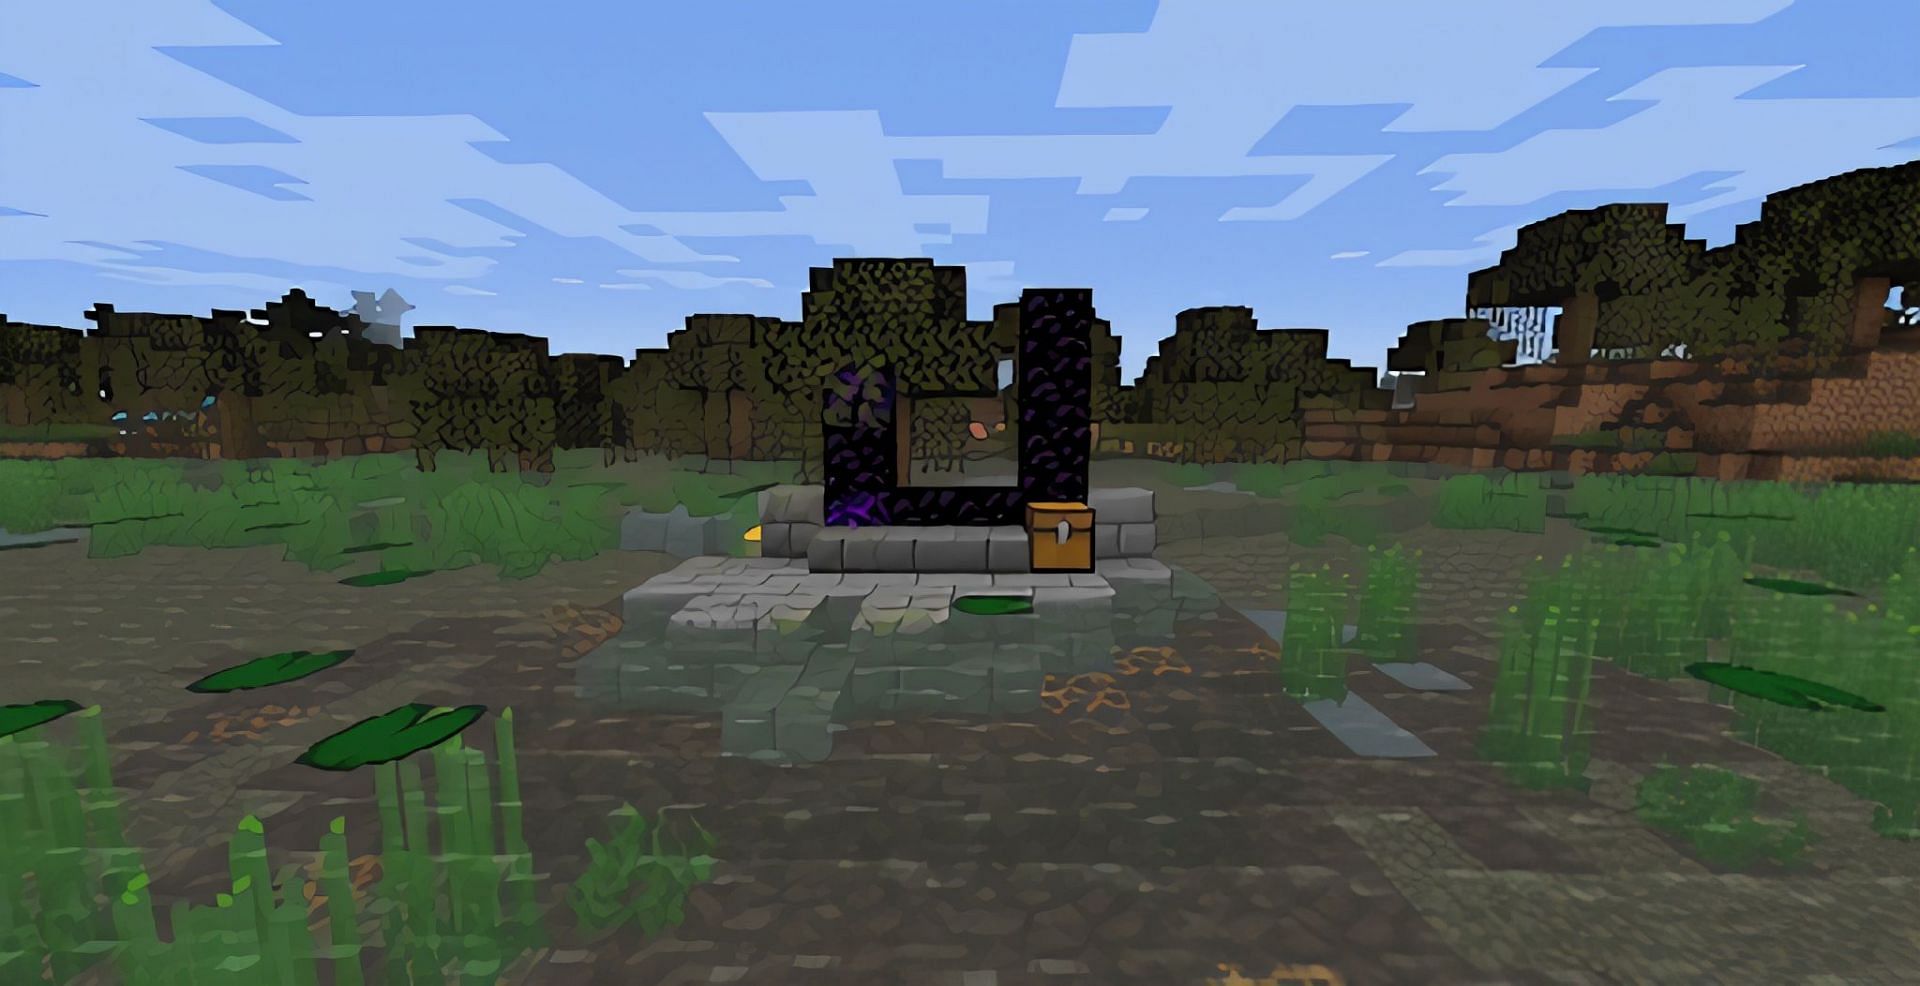 A Ruined portal in a swamp biome (Image via Minecraft)